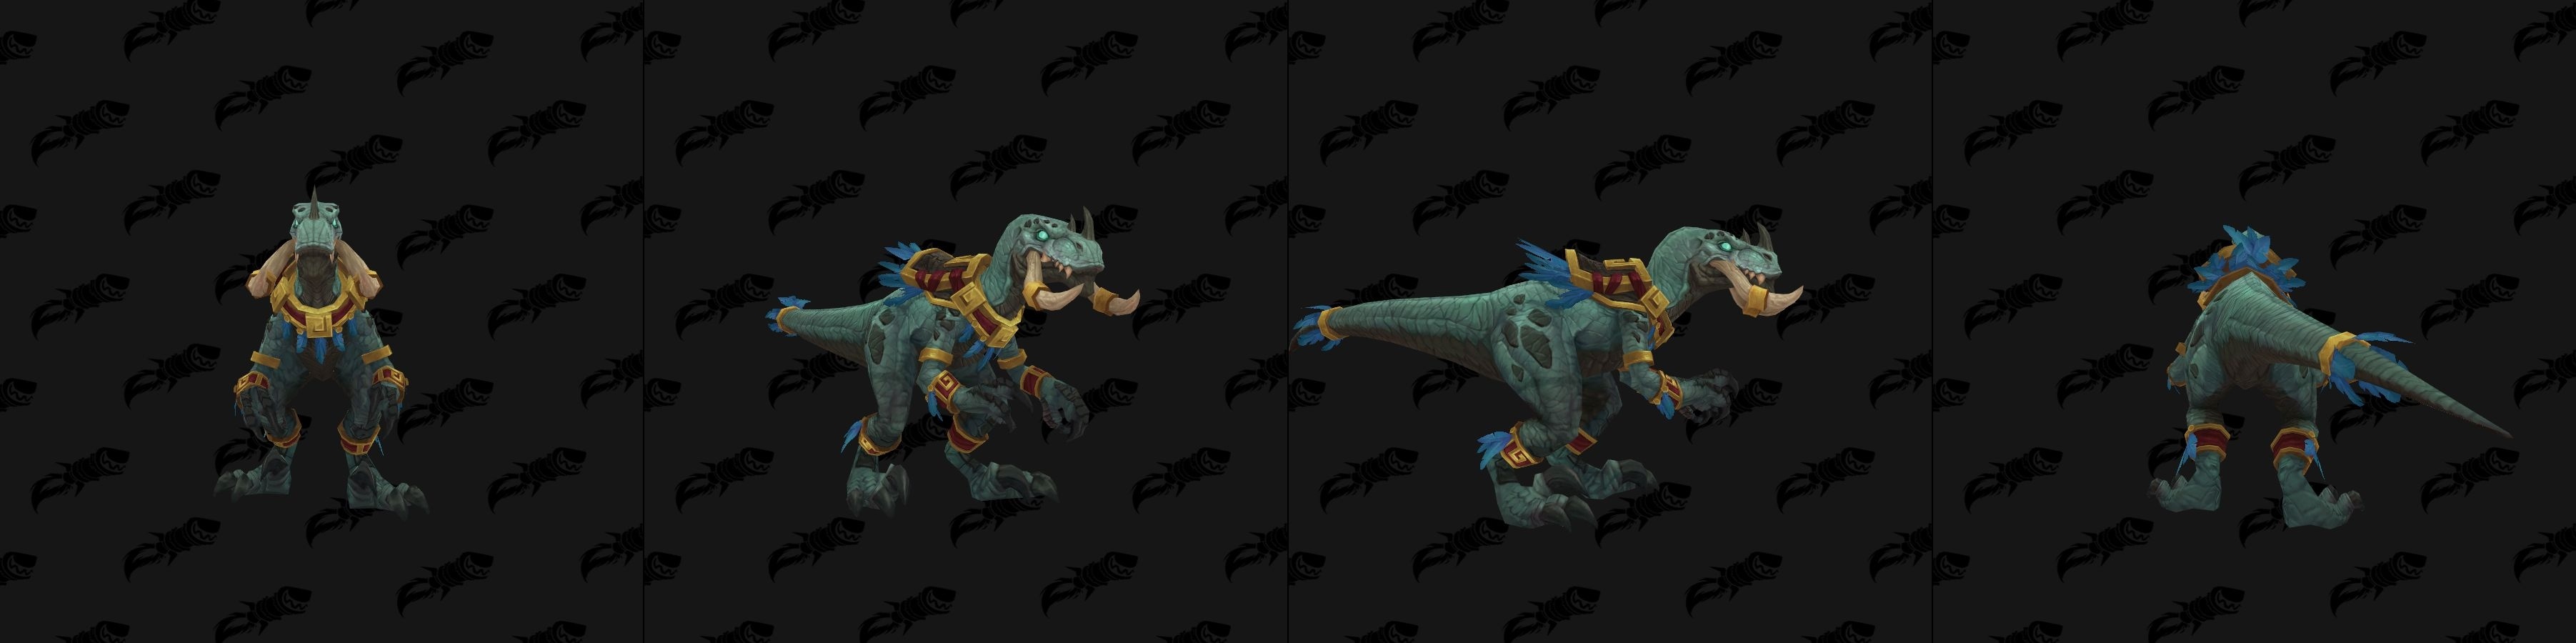 druid travel battle for azeroth - Druid Forms In Battle For Azeroth